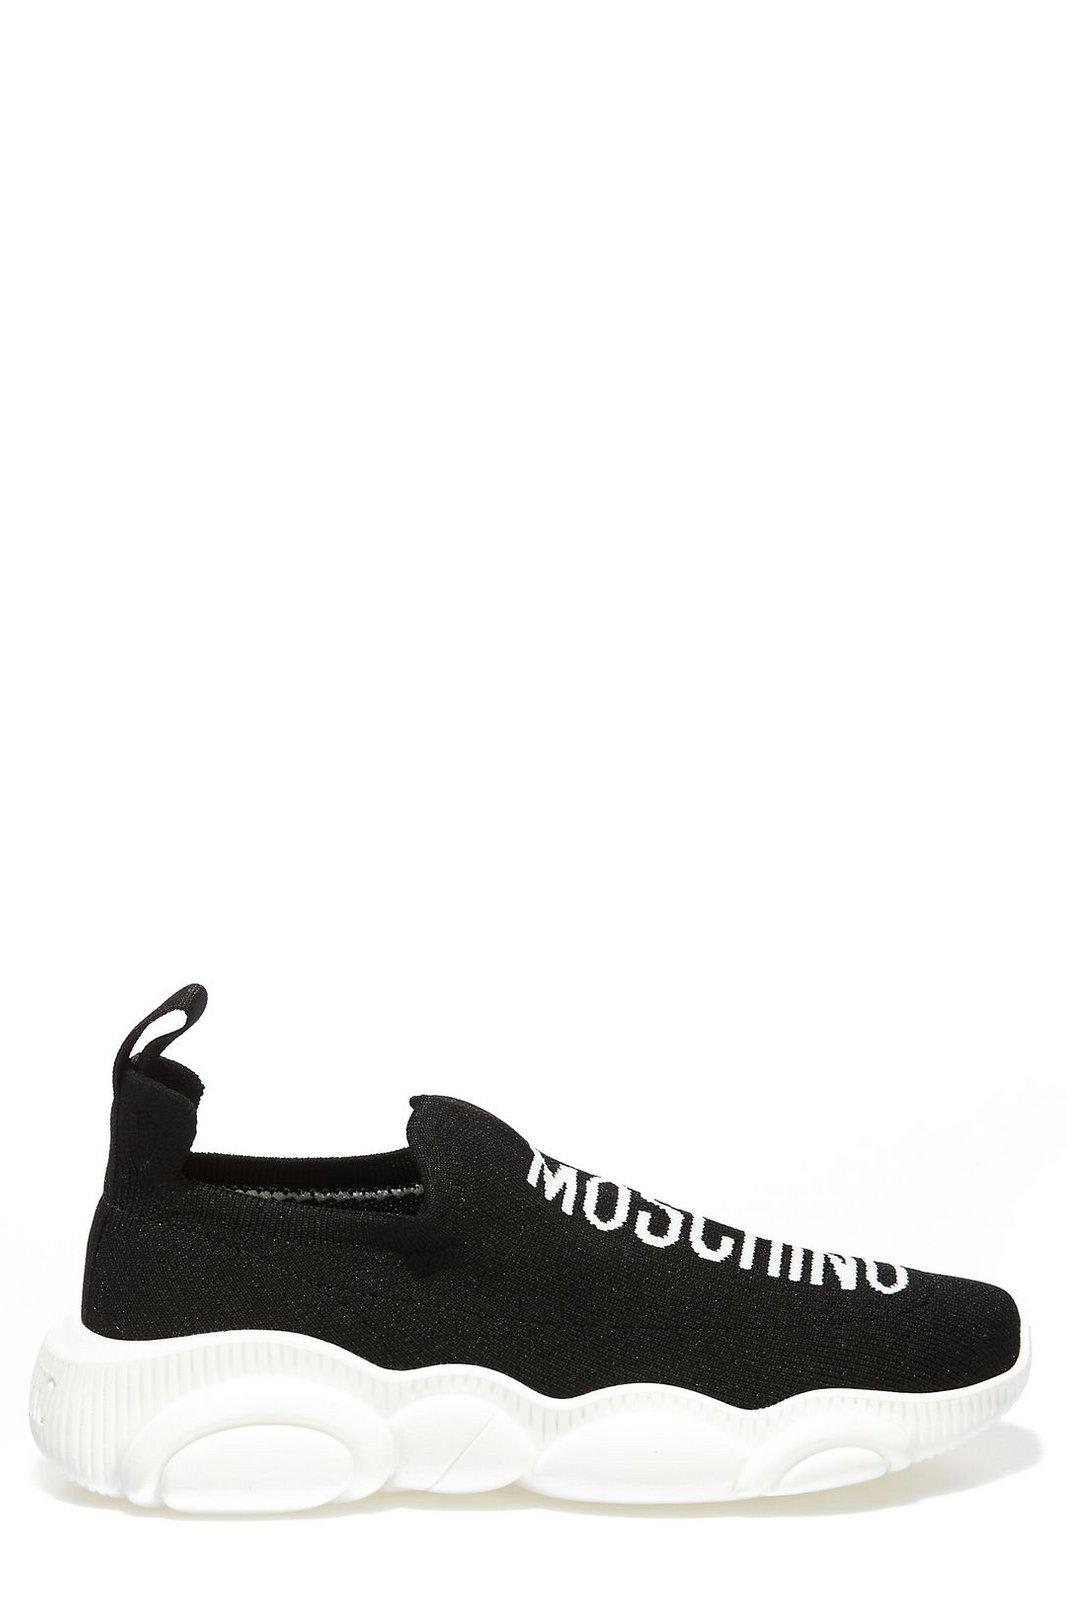 Shop Moschino Teddy Slip On Sneakers In Black